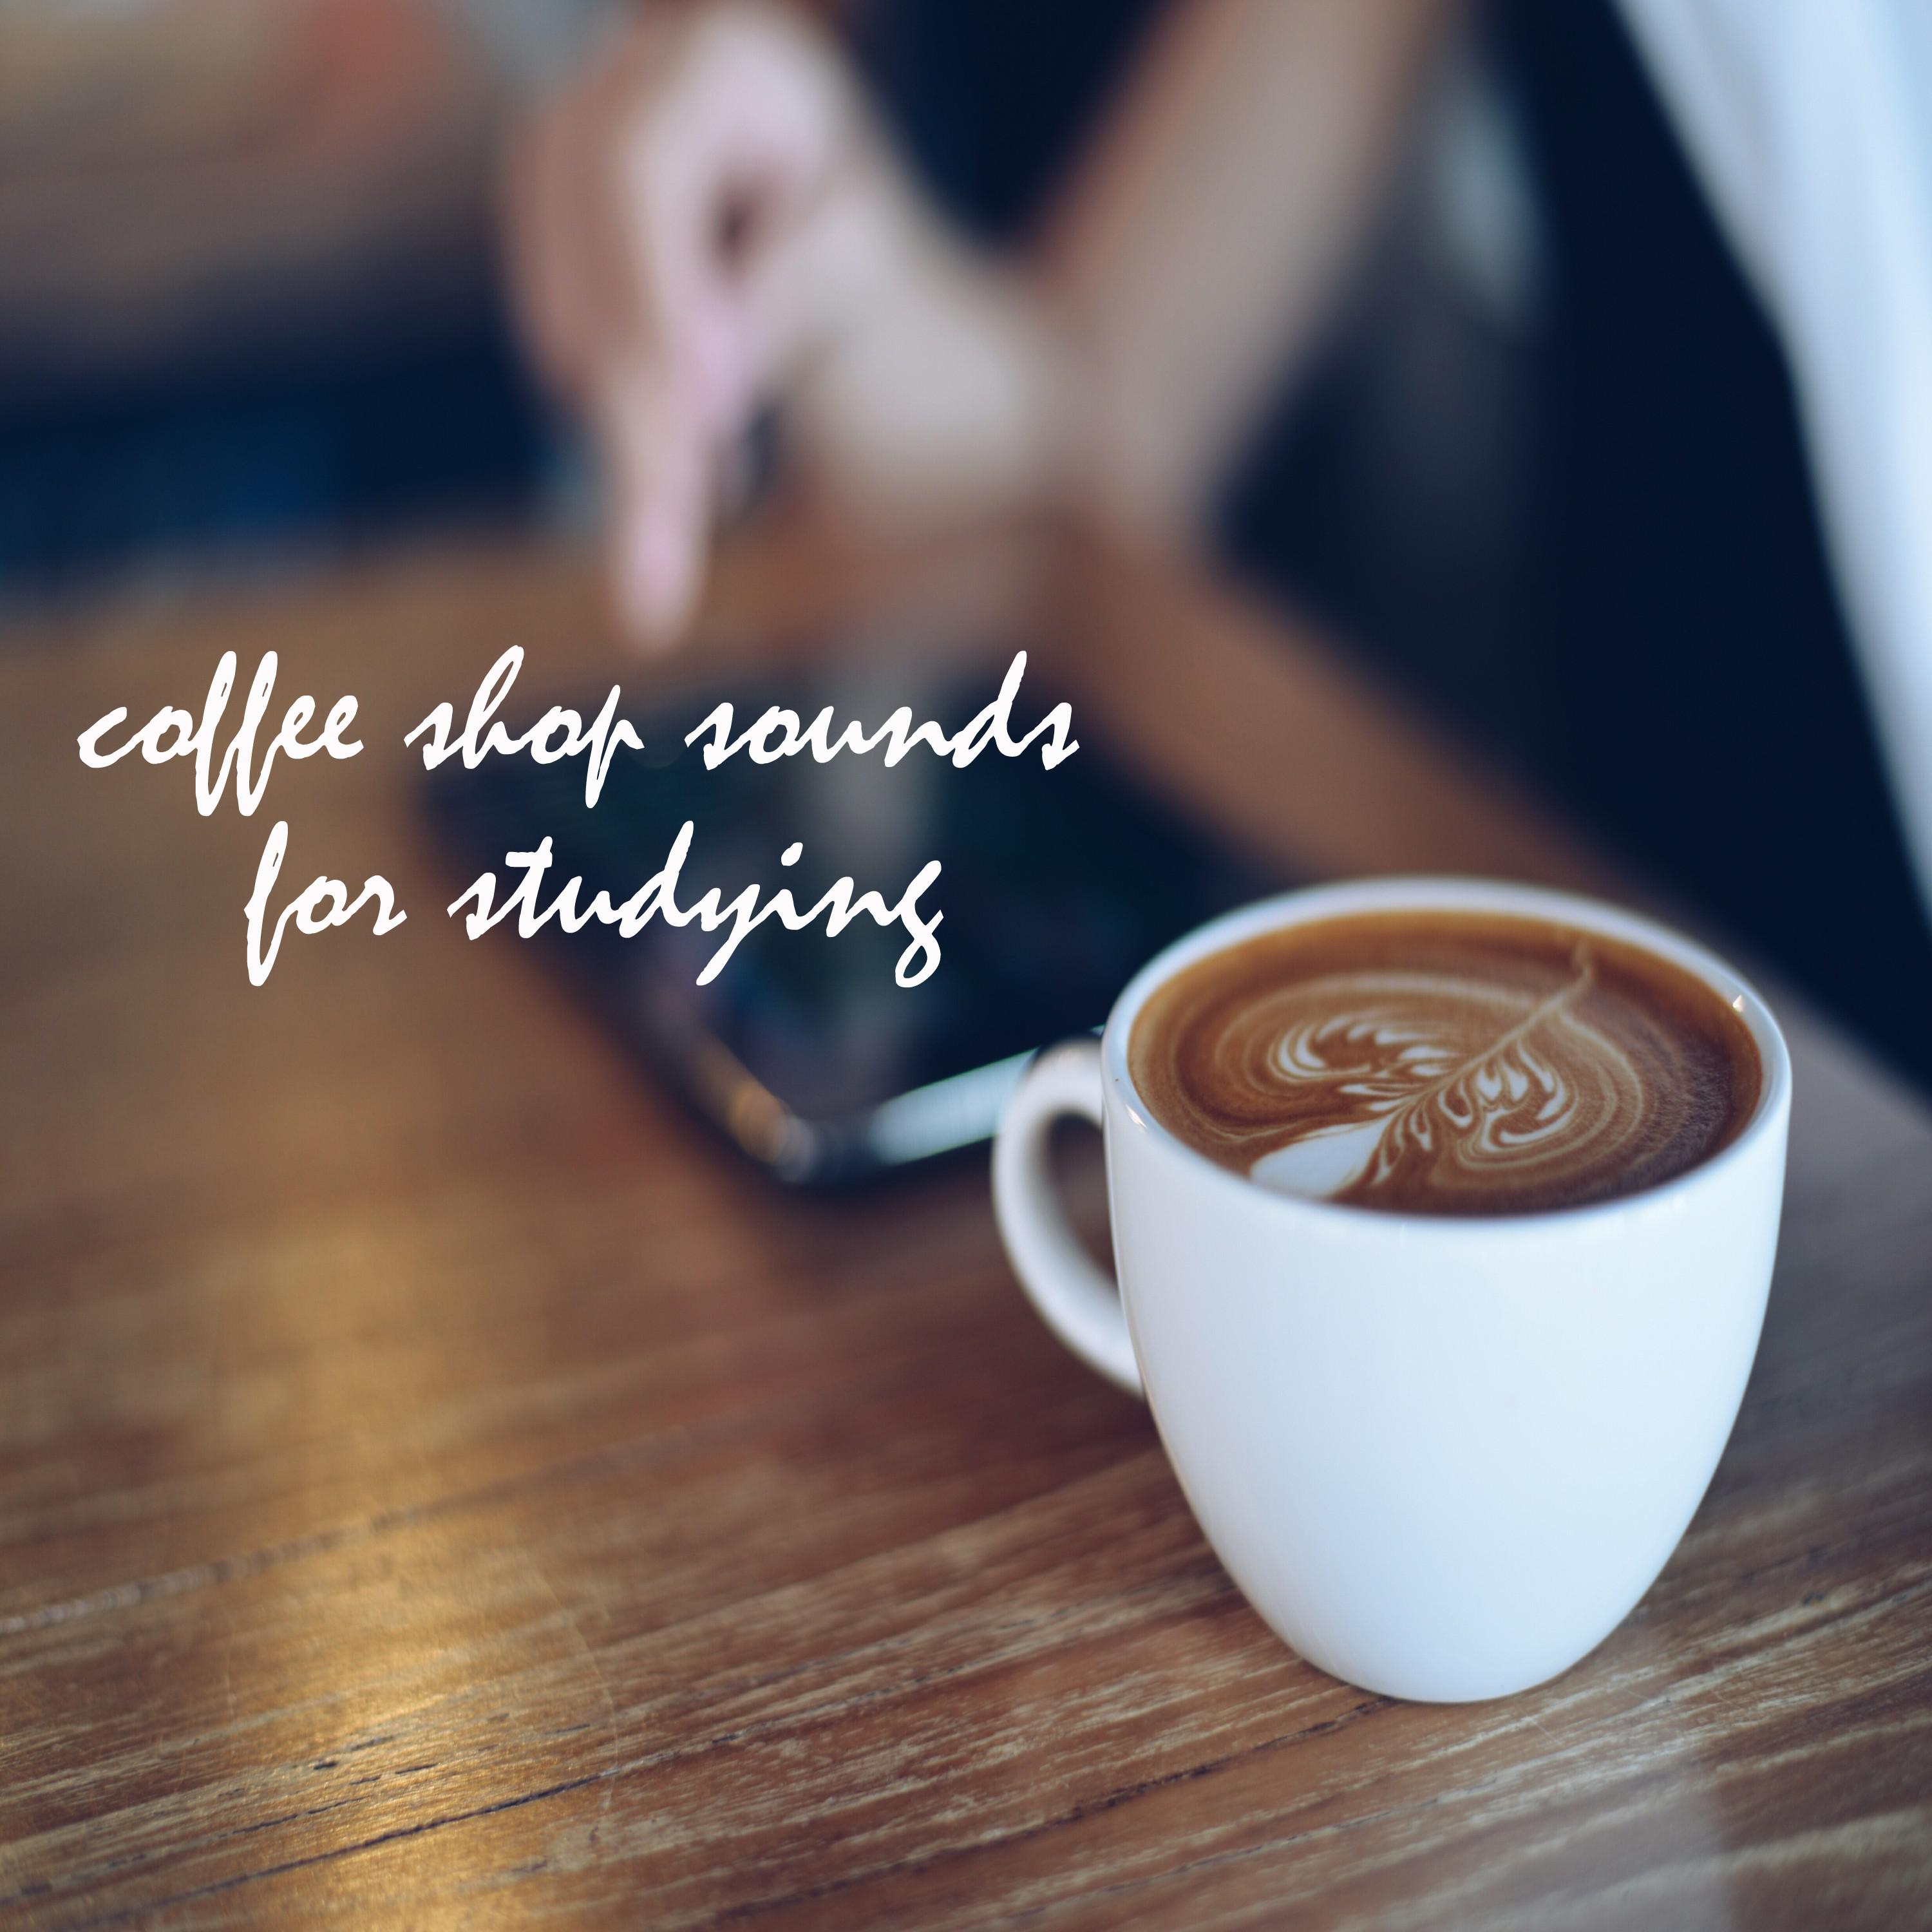 Coffee Shop Sounds for Studying and Working, Pt. 60